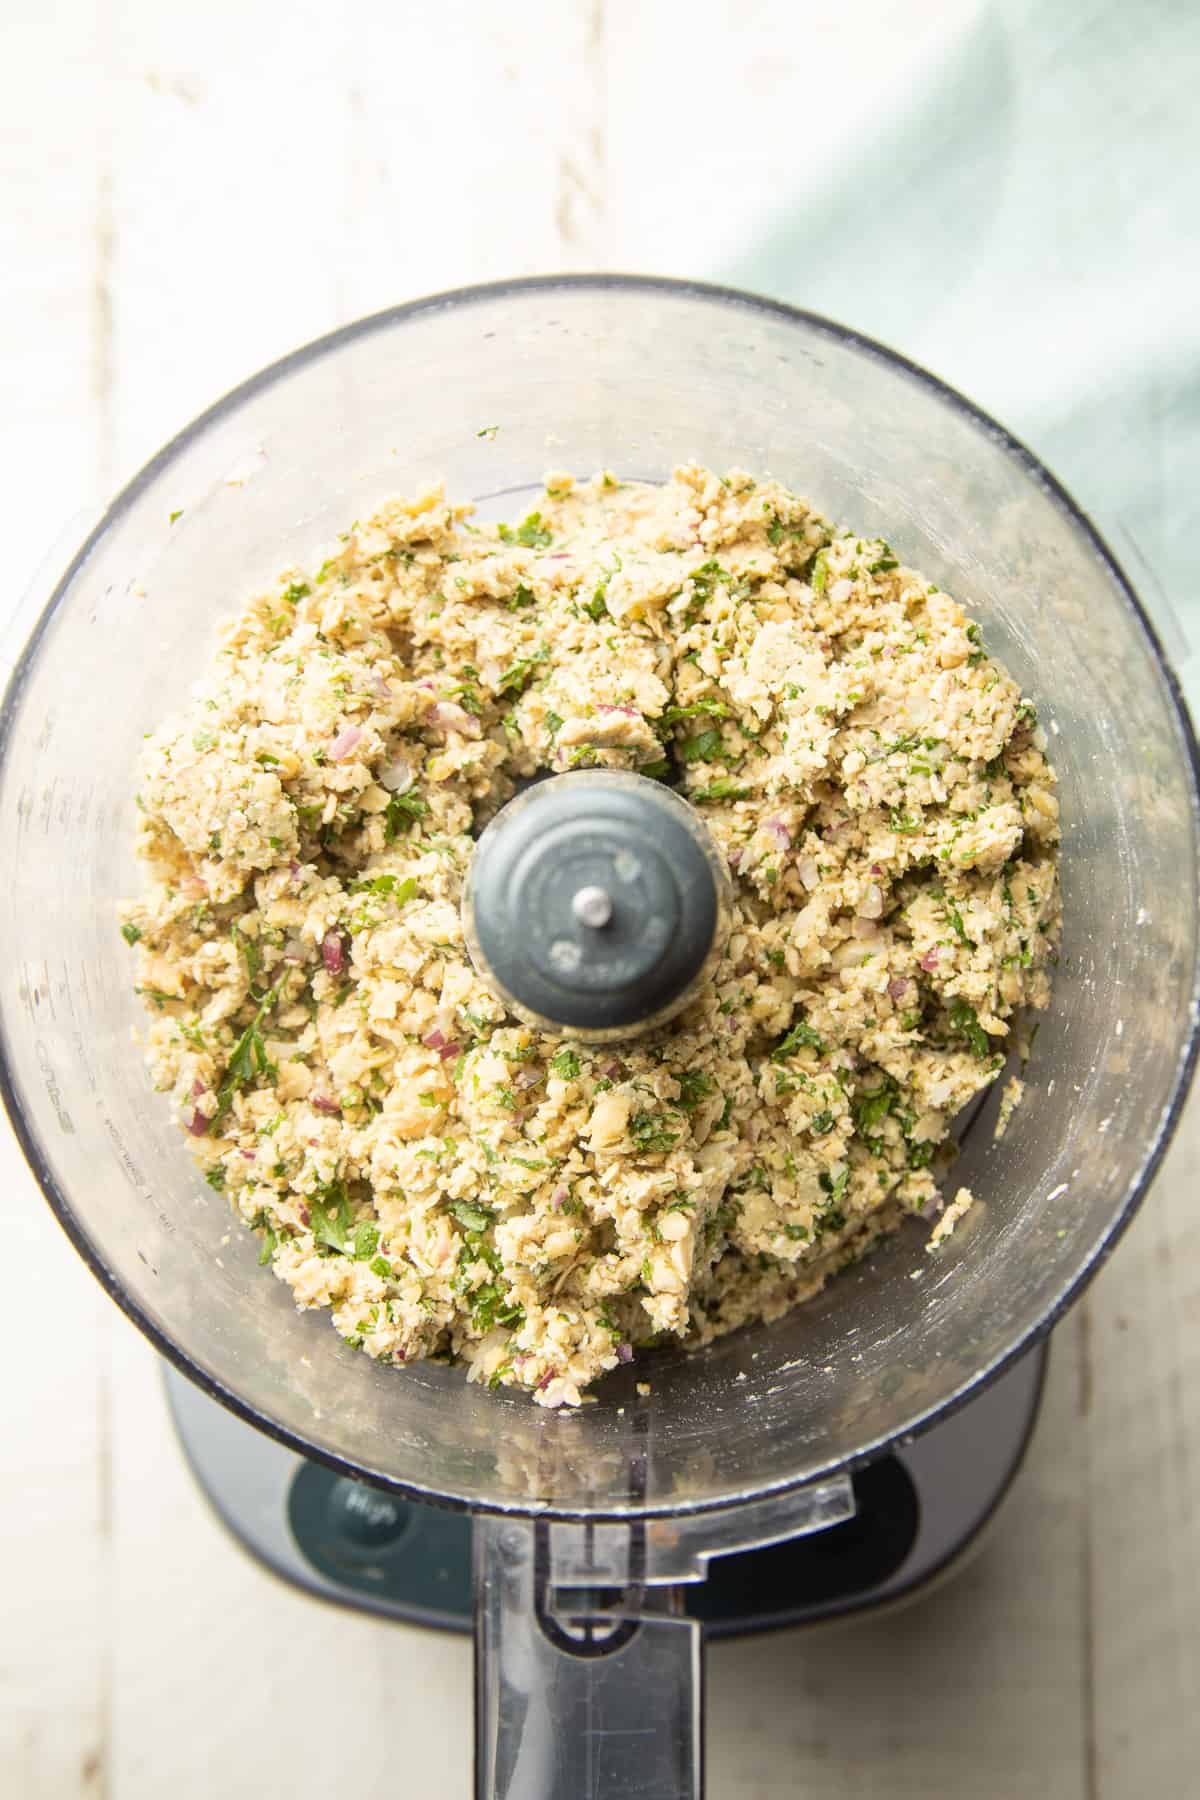 Ground chickpeas, oats, herbs, and spices in a food processor bowl.